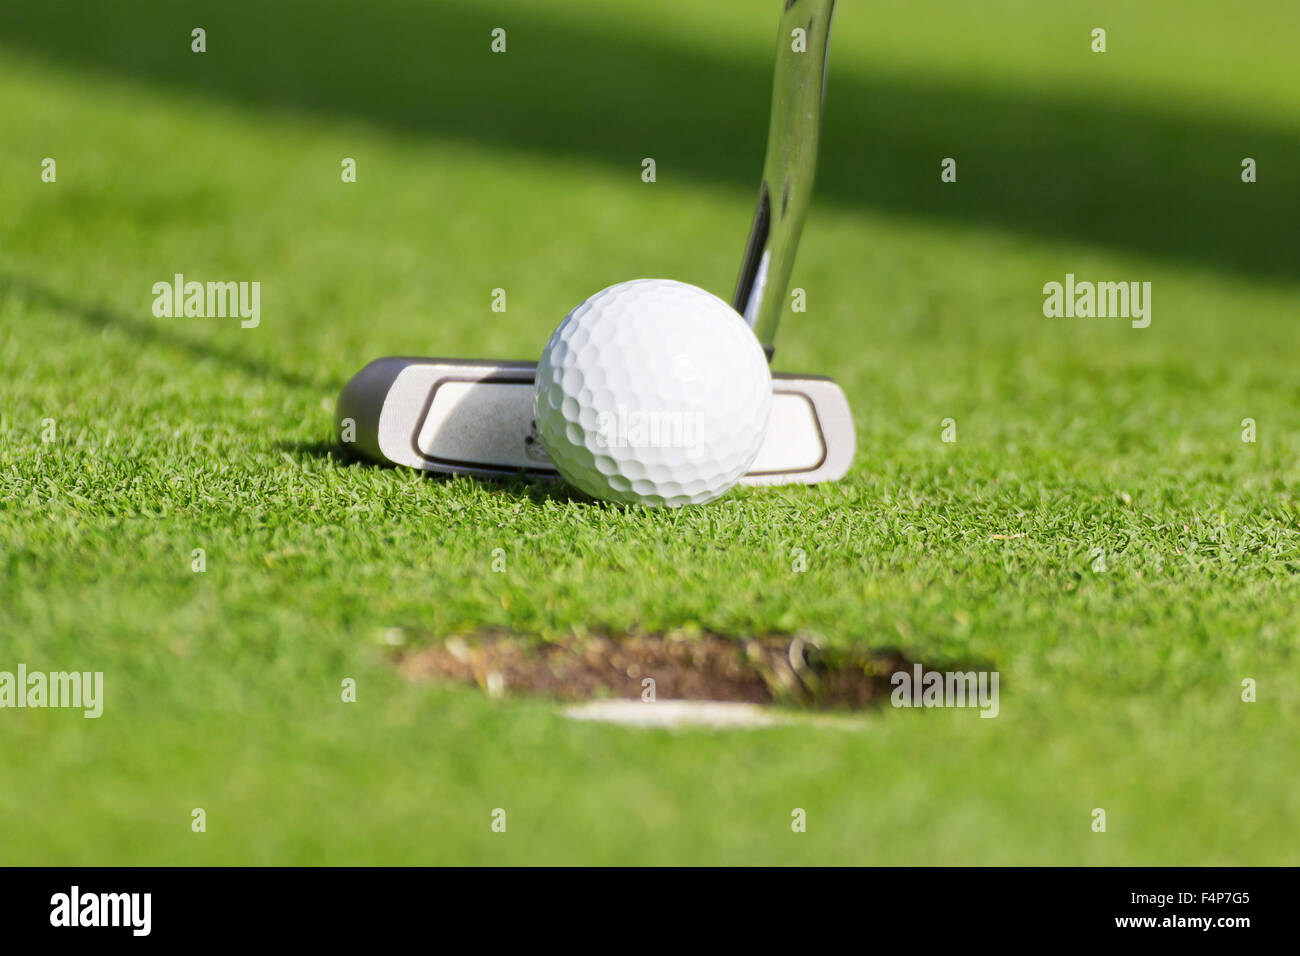 Golf ball in front of driver Stock Photo